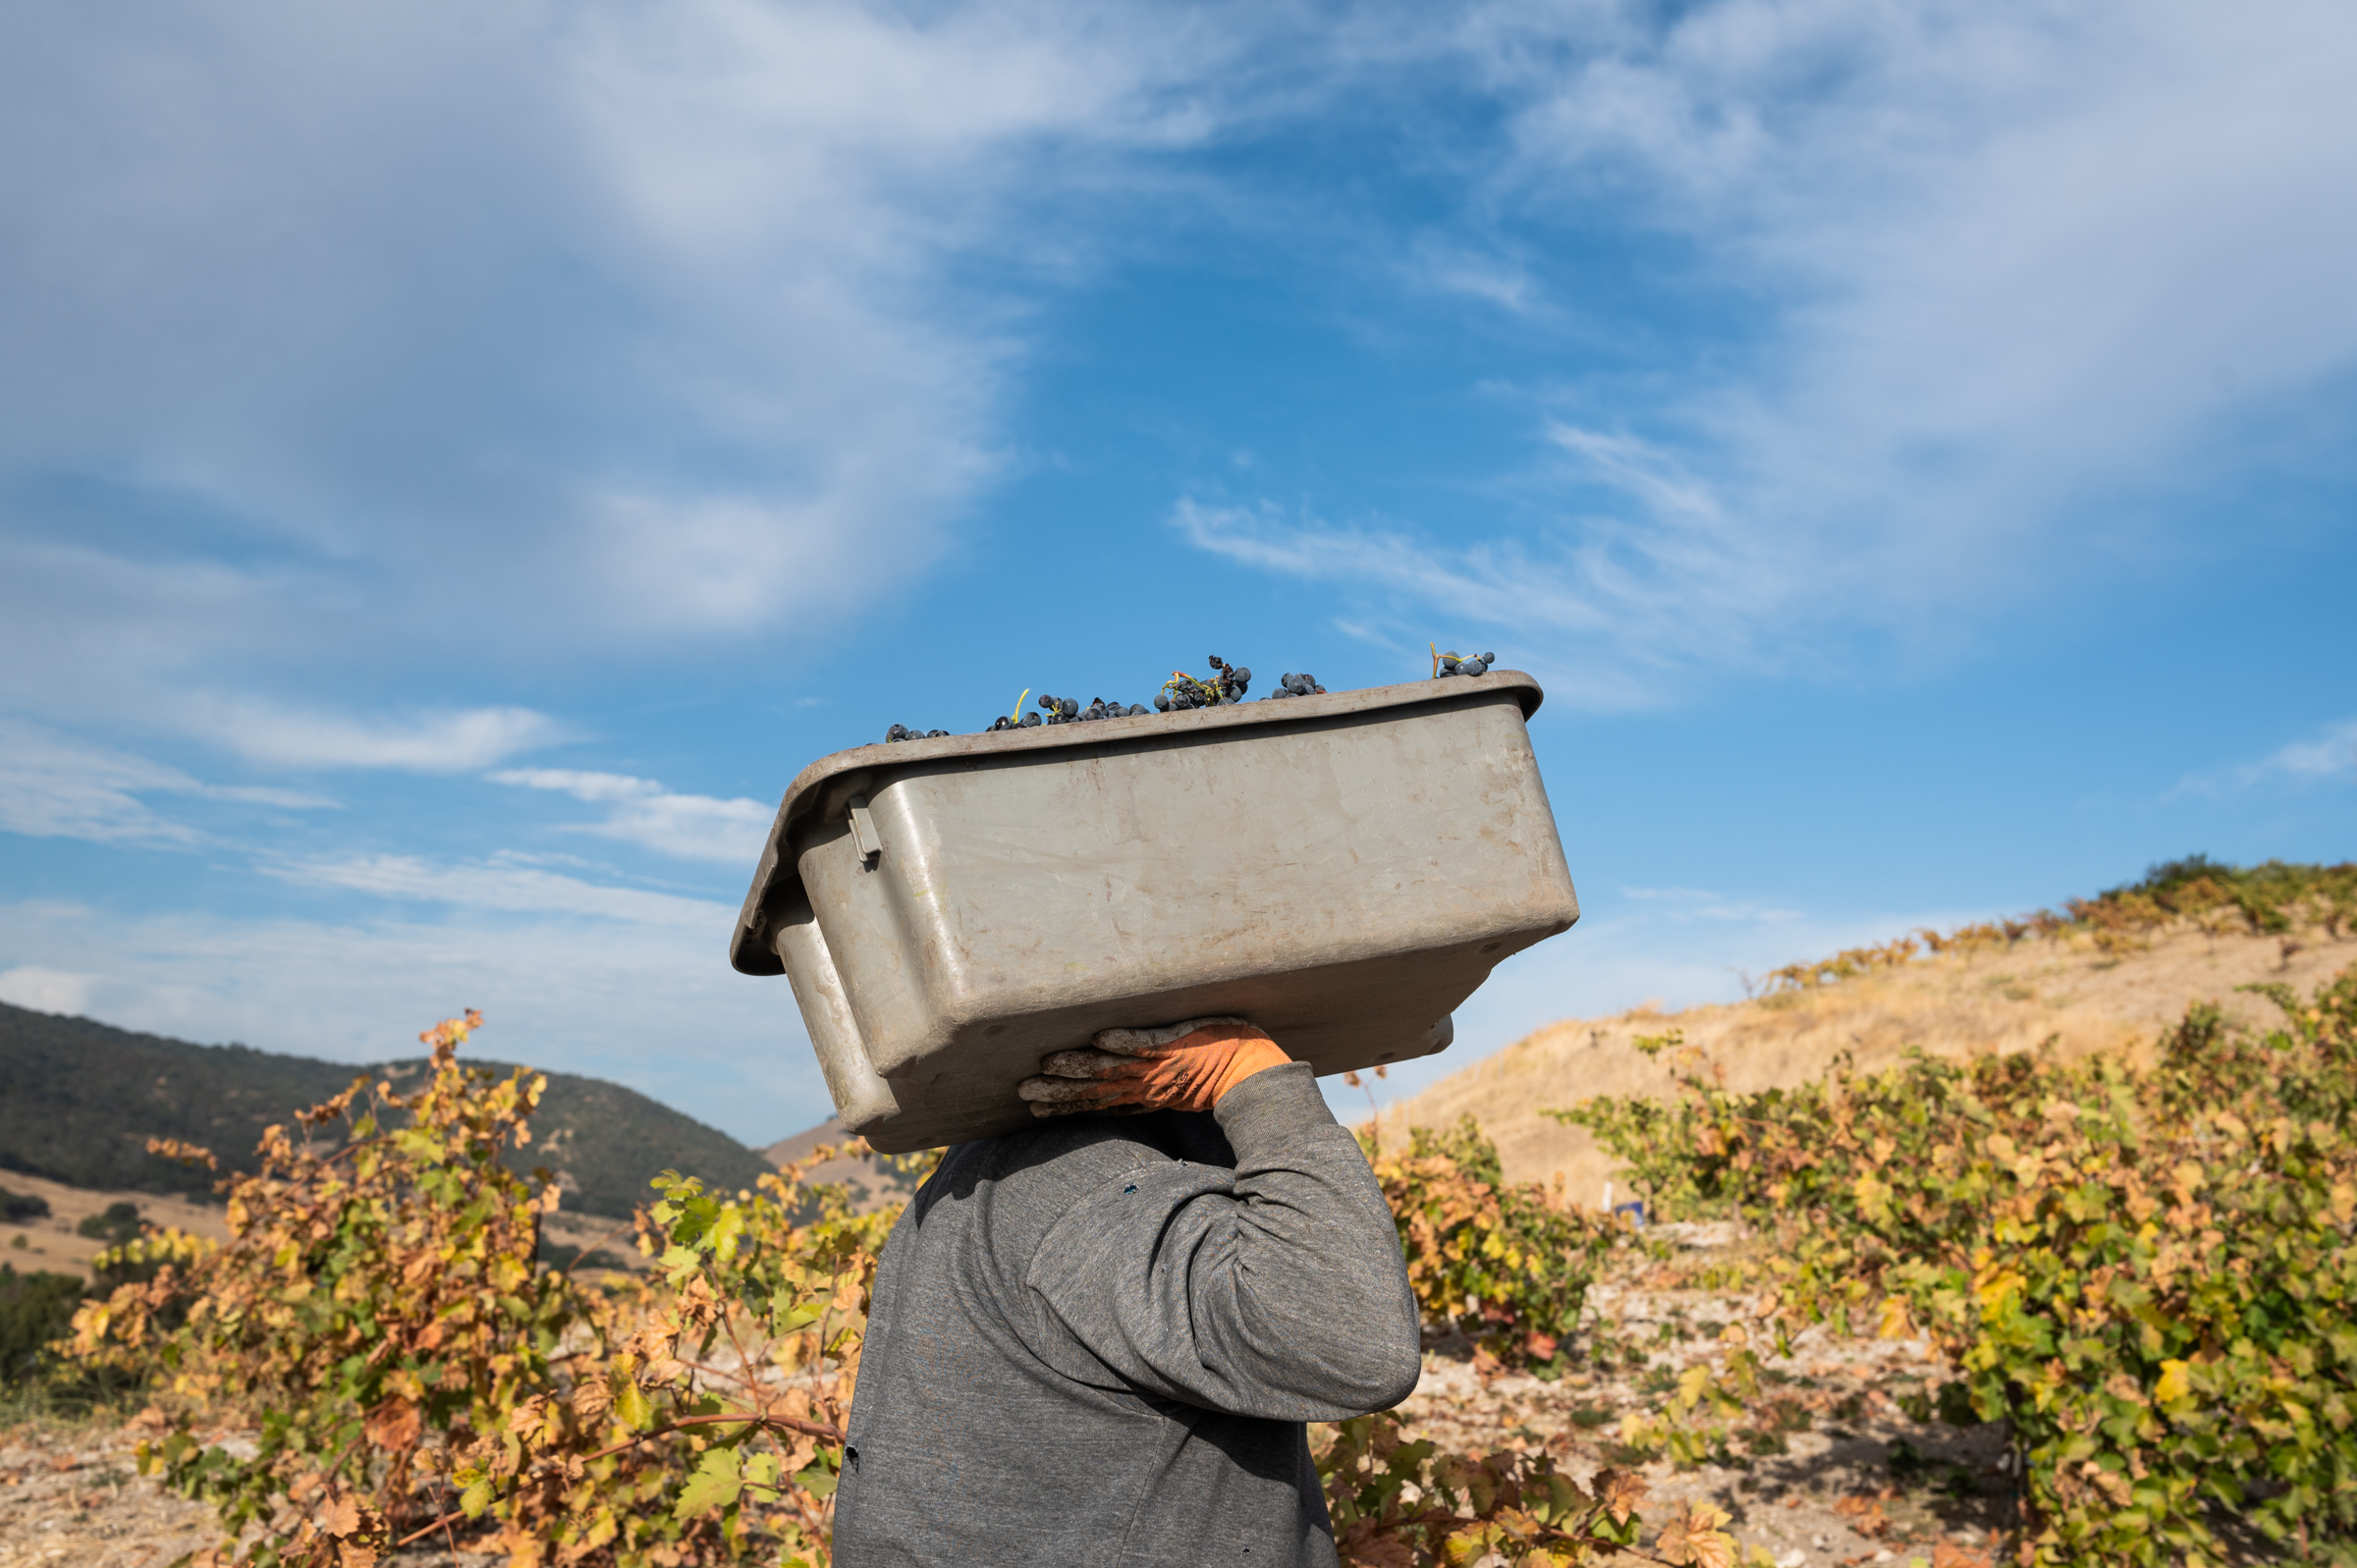 A tray of harvested grapes is carried to a nearby bin